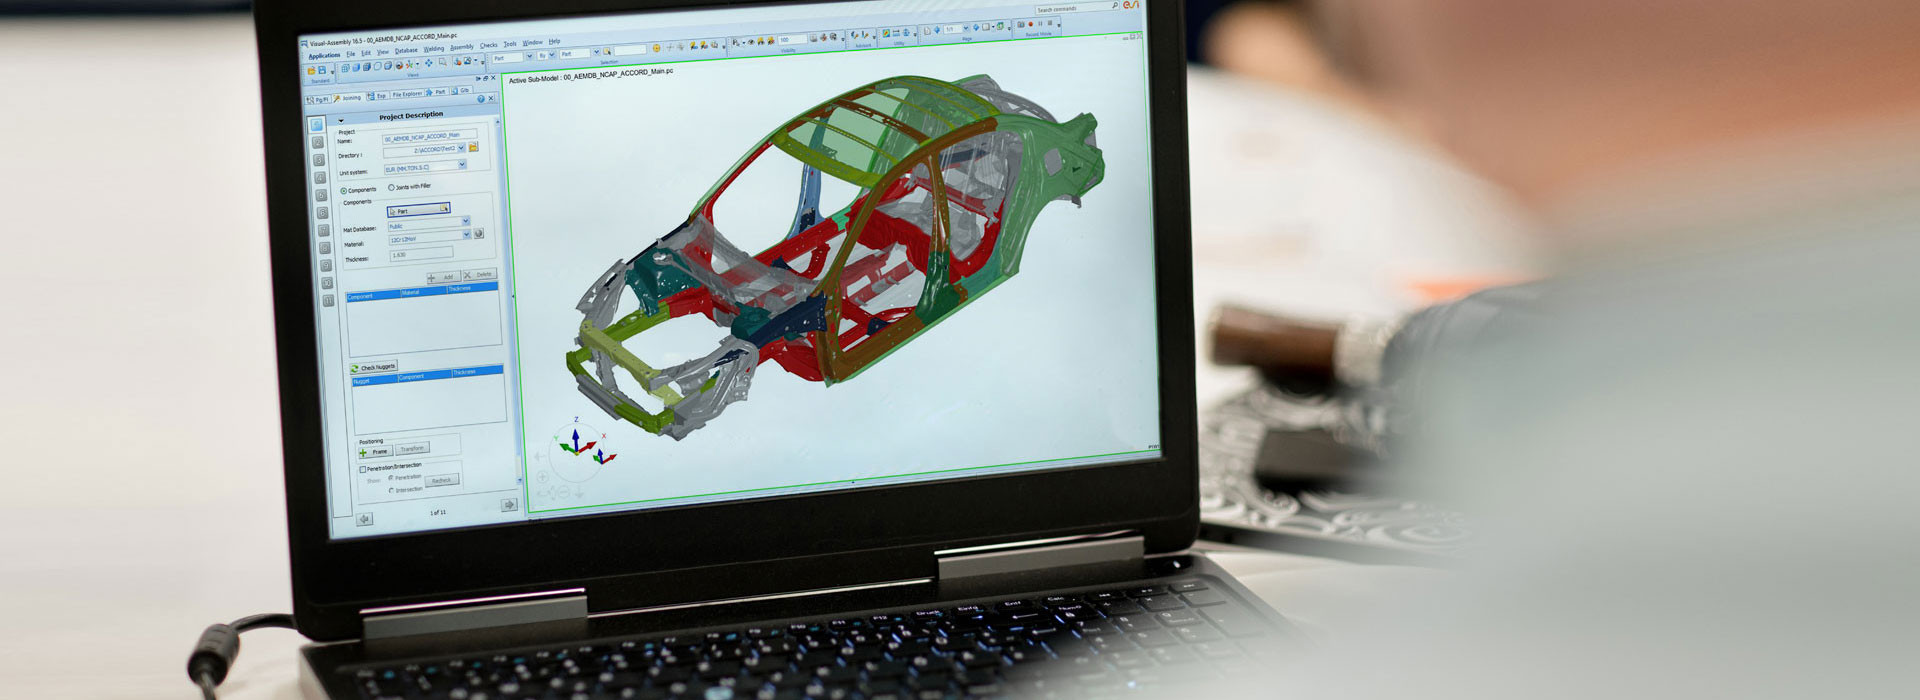 Multi-material assembly simulation is key to engineering future lightweight vehicles 